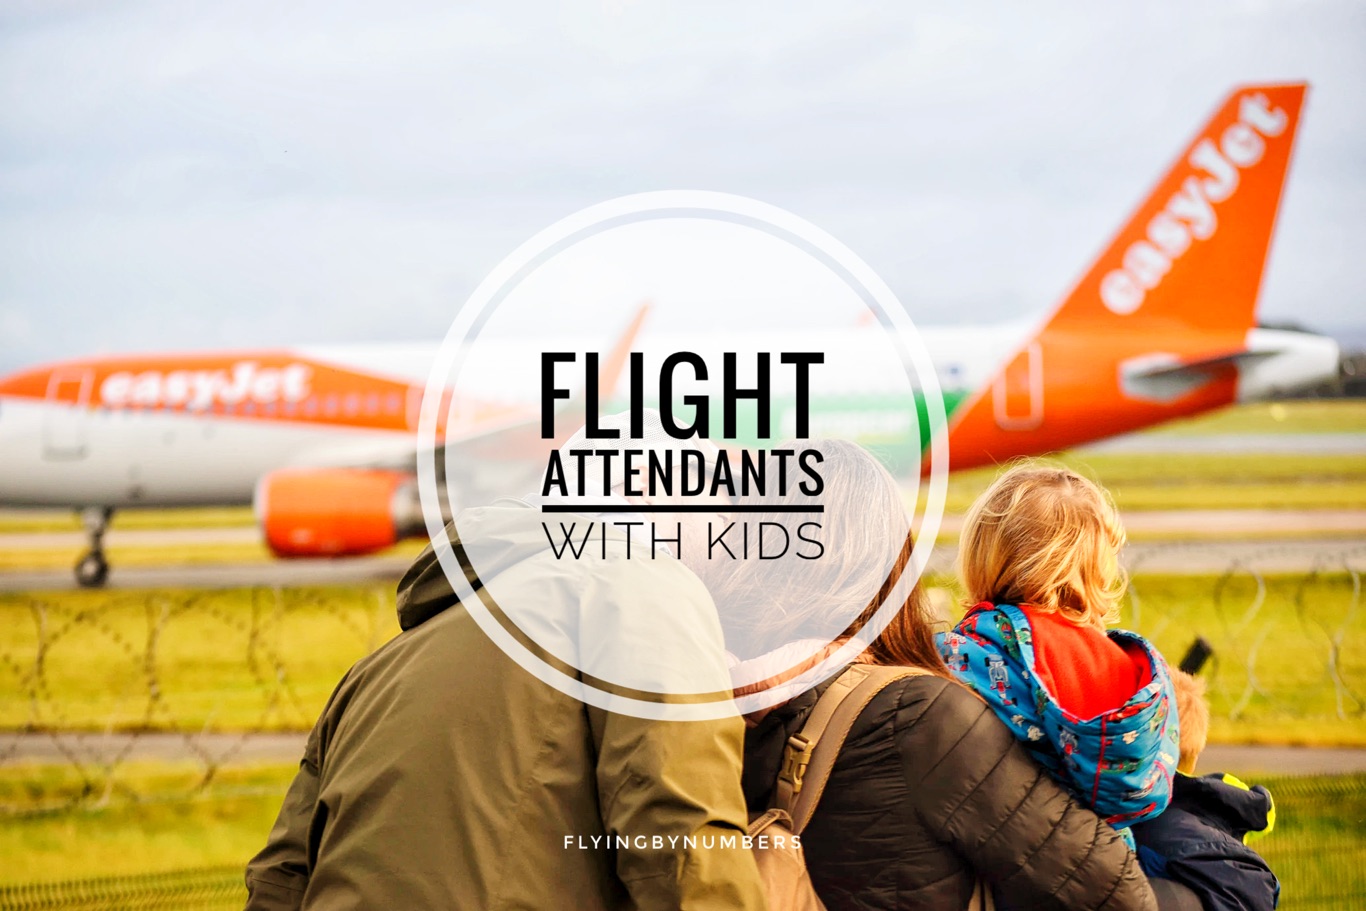 Can you be a flight attendant with kids or a young family?